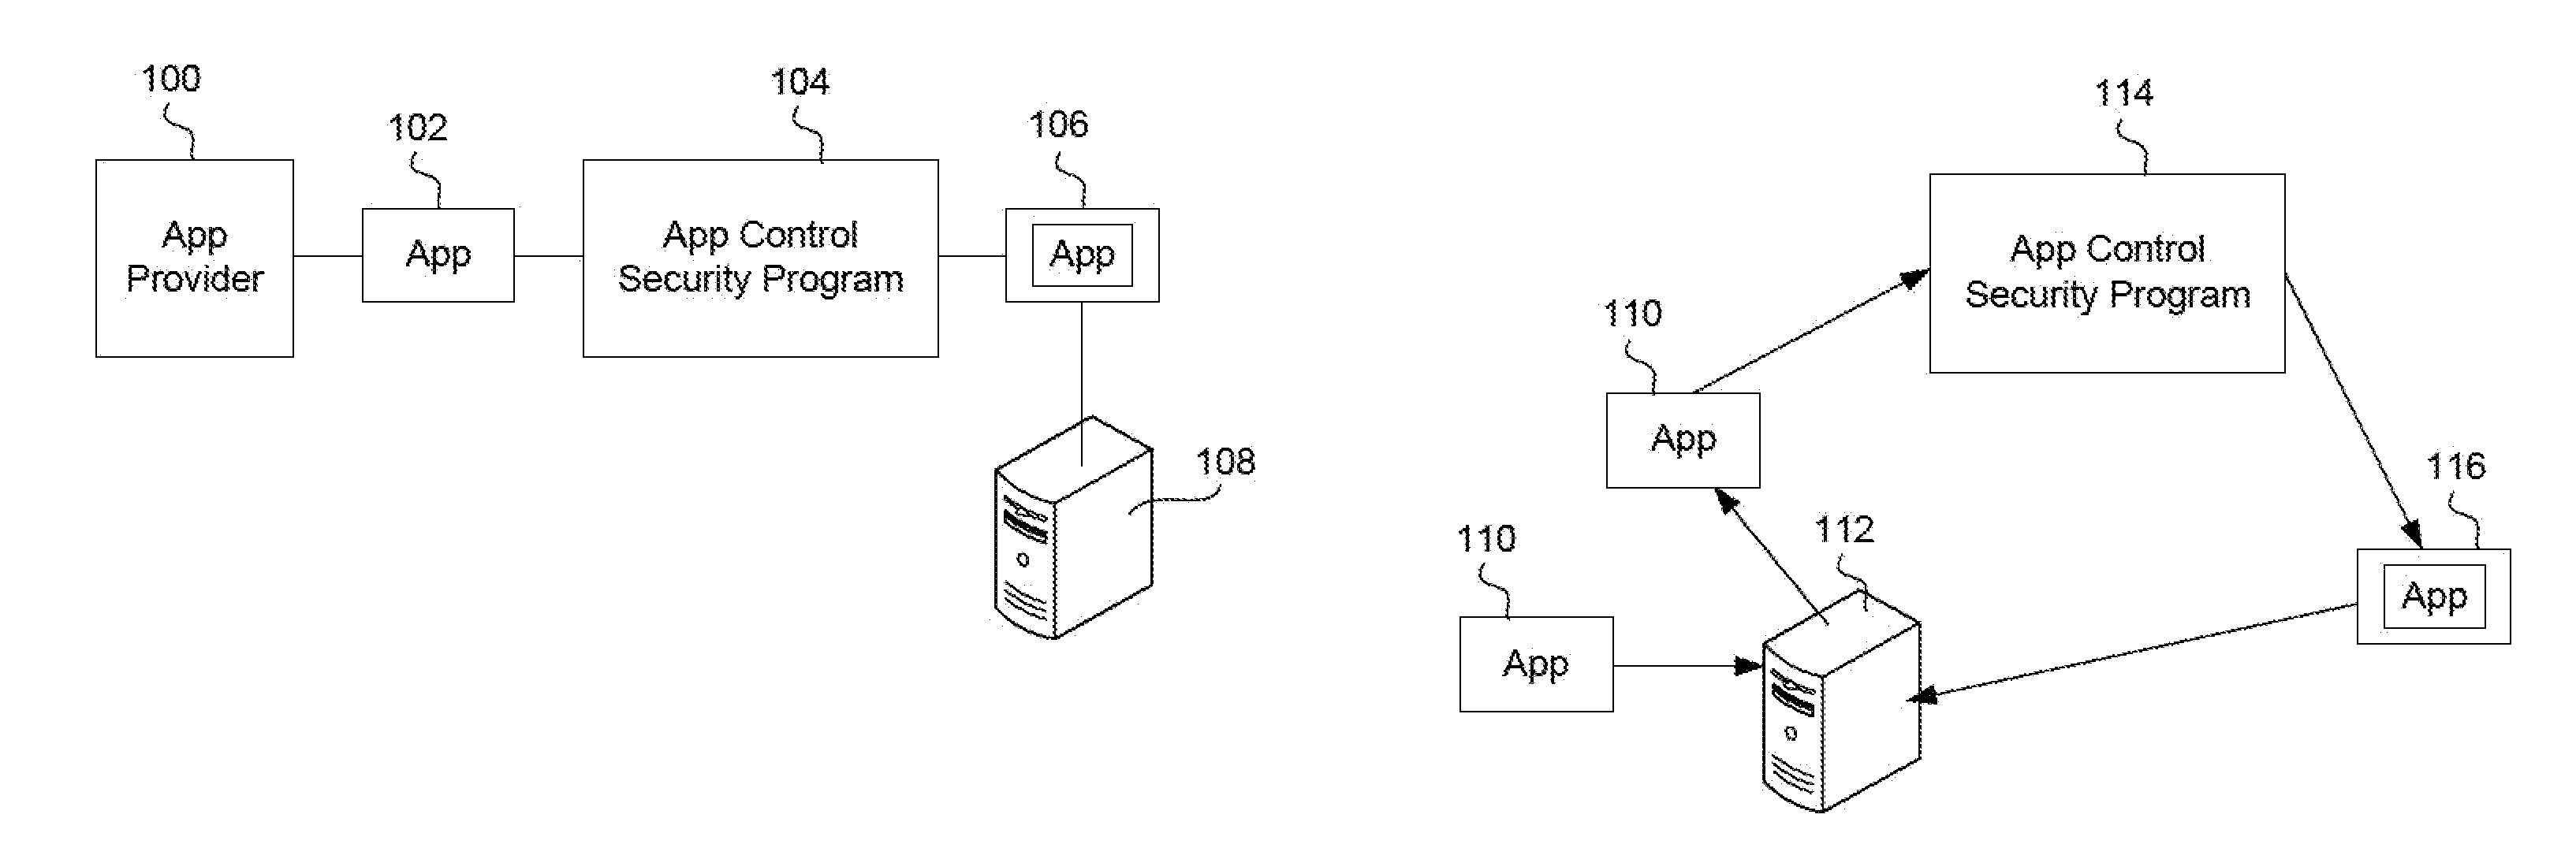 Creating a virtual private network (VPN) for a single app on an internet-enabled device or system